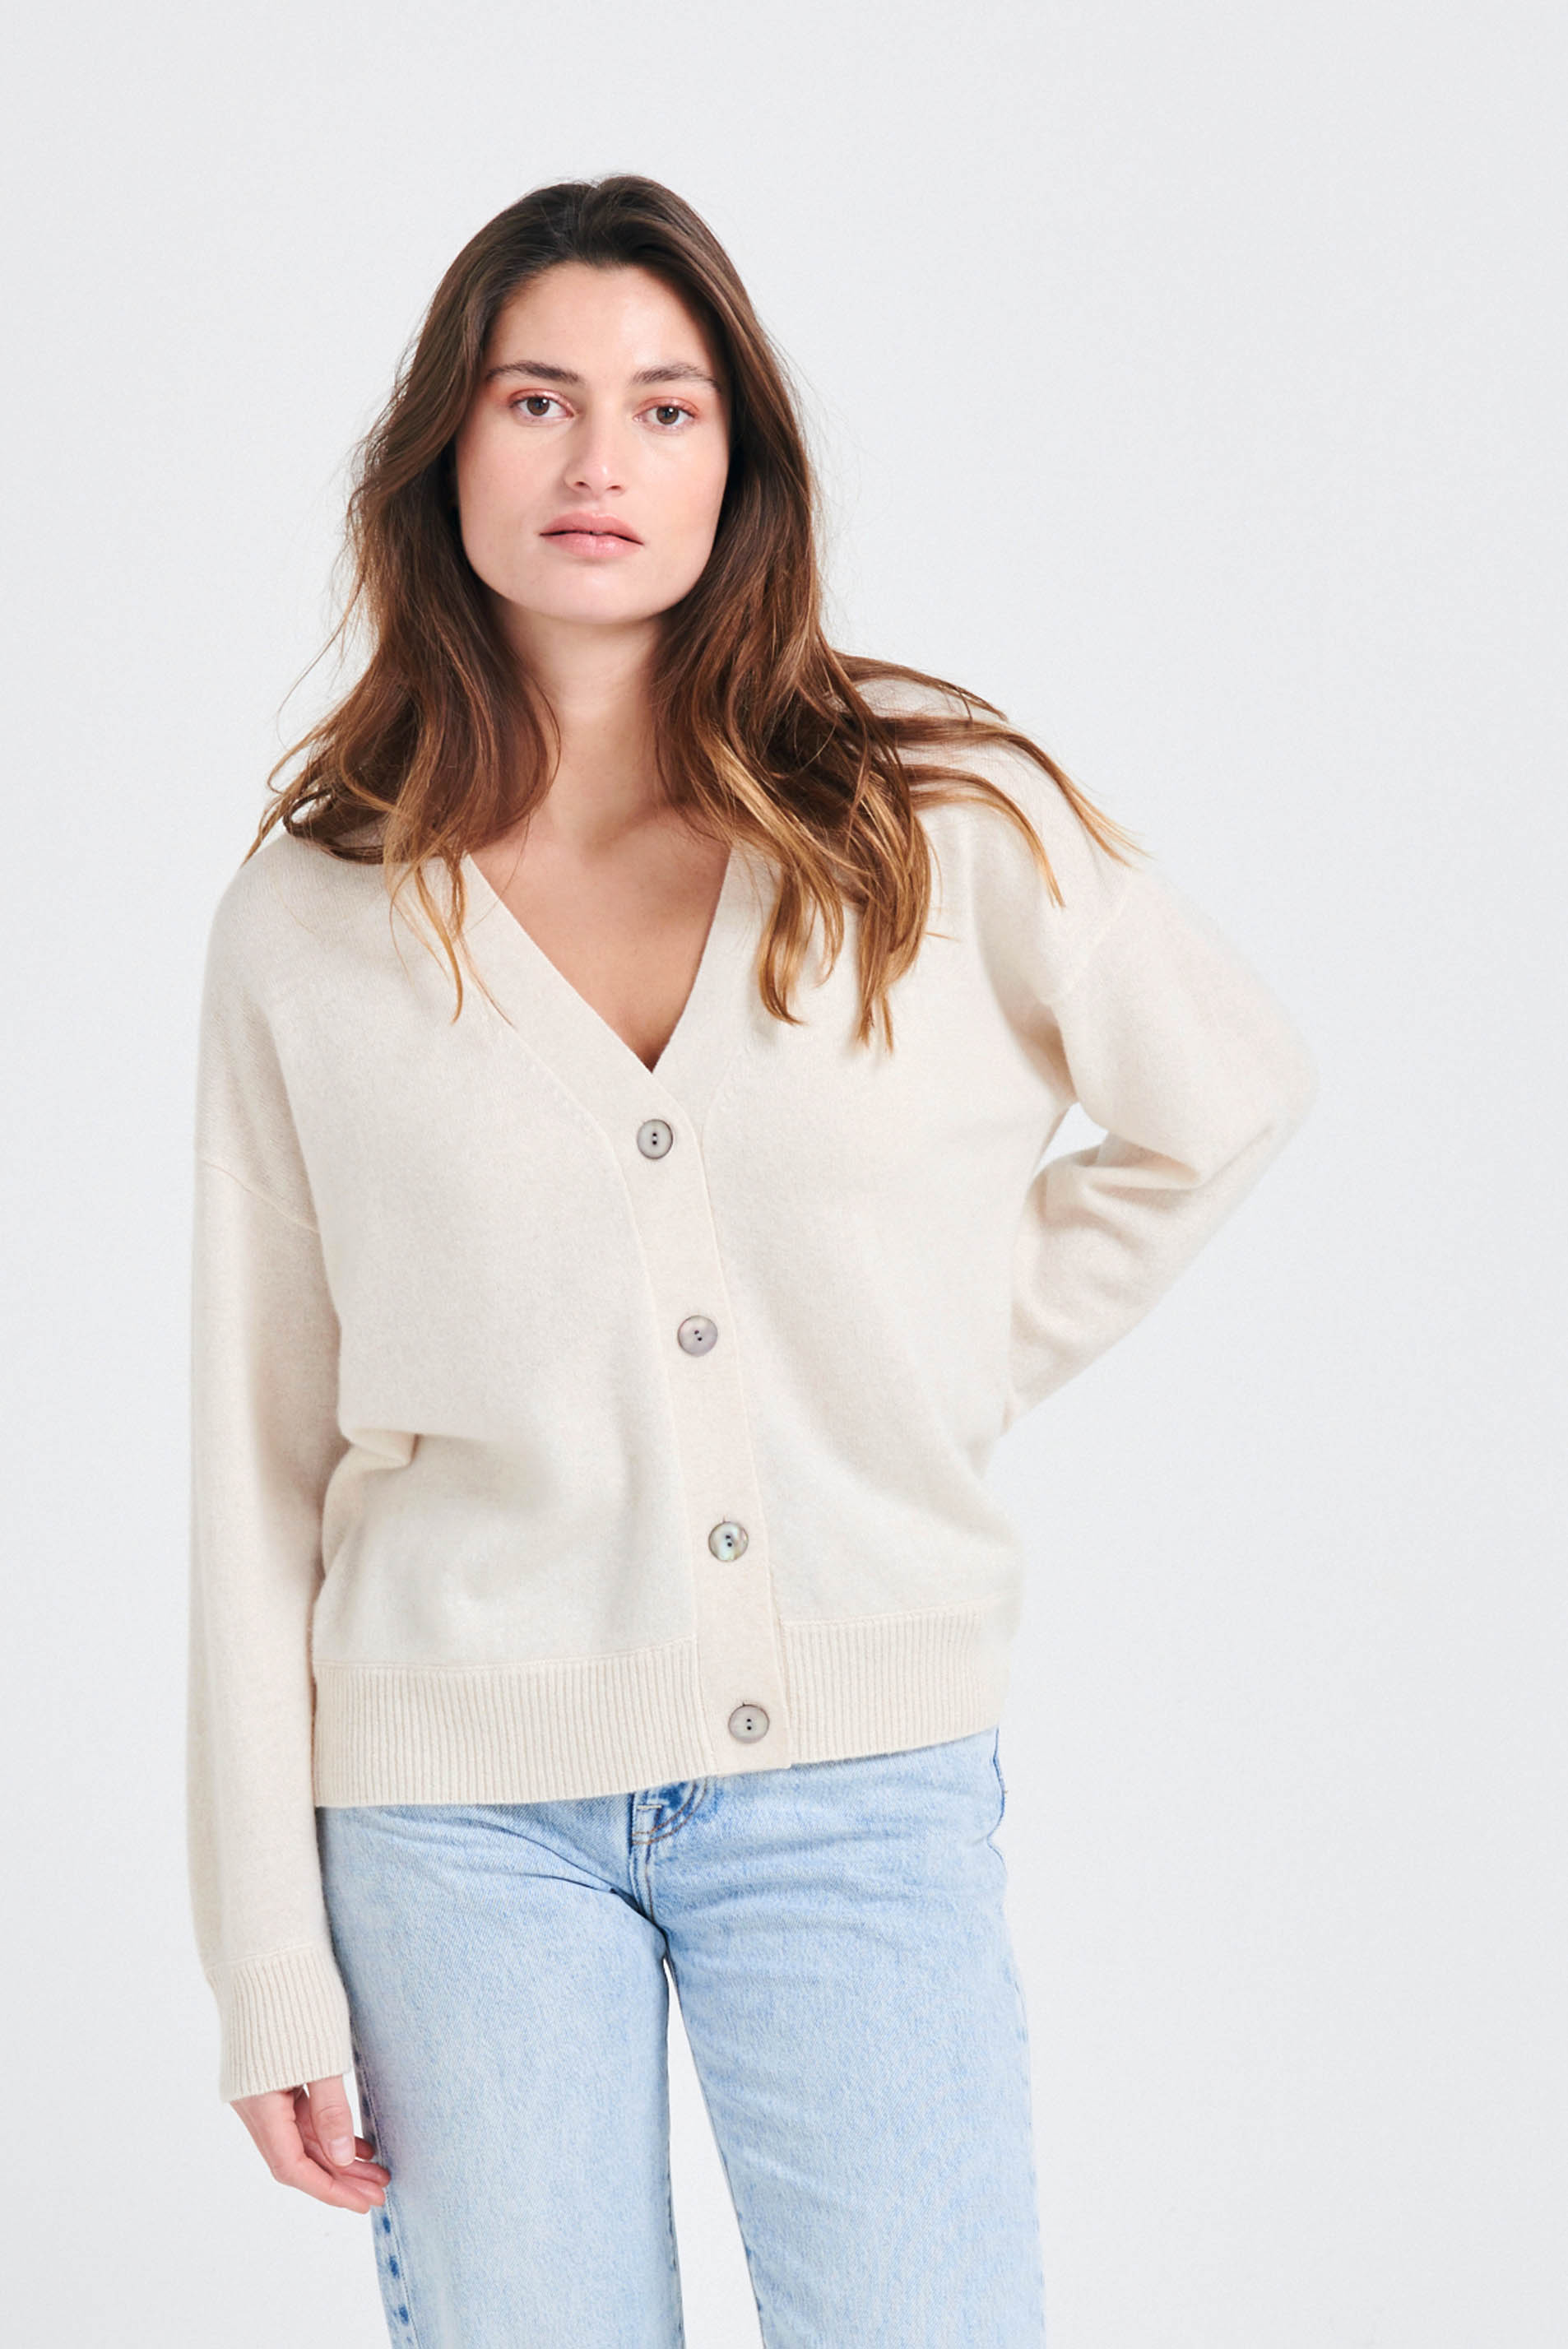 Brown haired female model wearing Jumper1234 Oversize cashmere vee neck cardigan in oatmeal